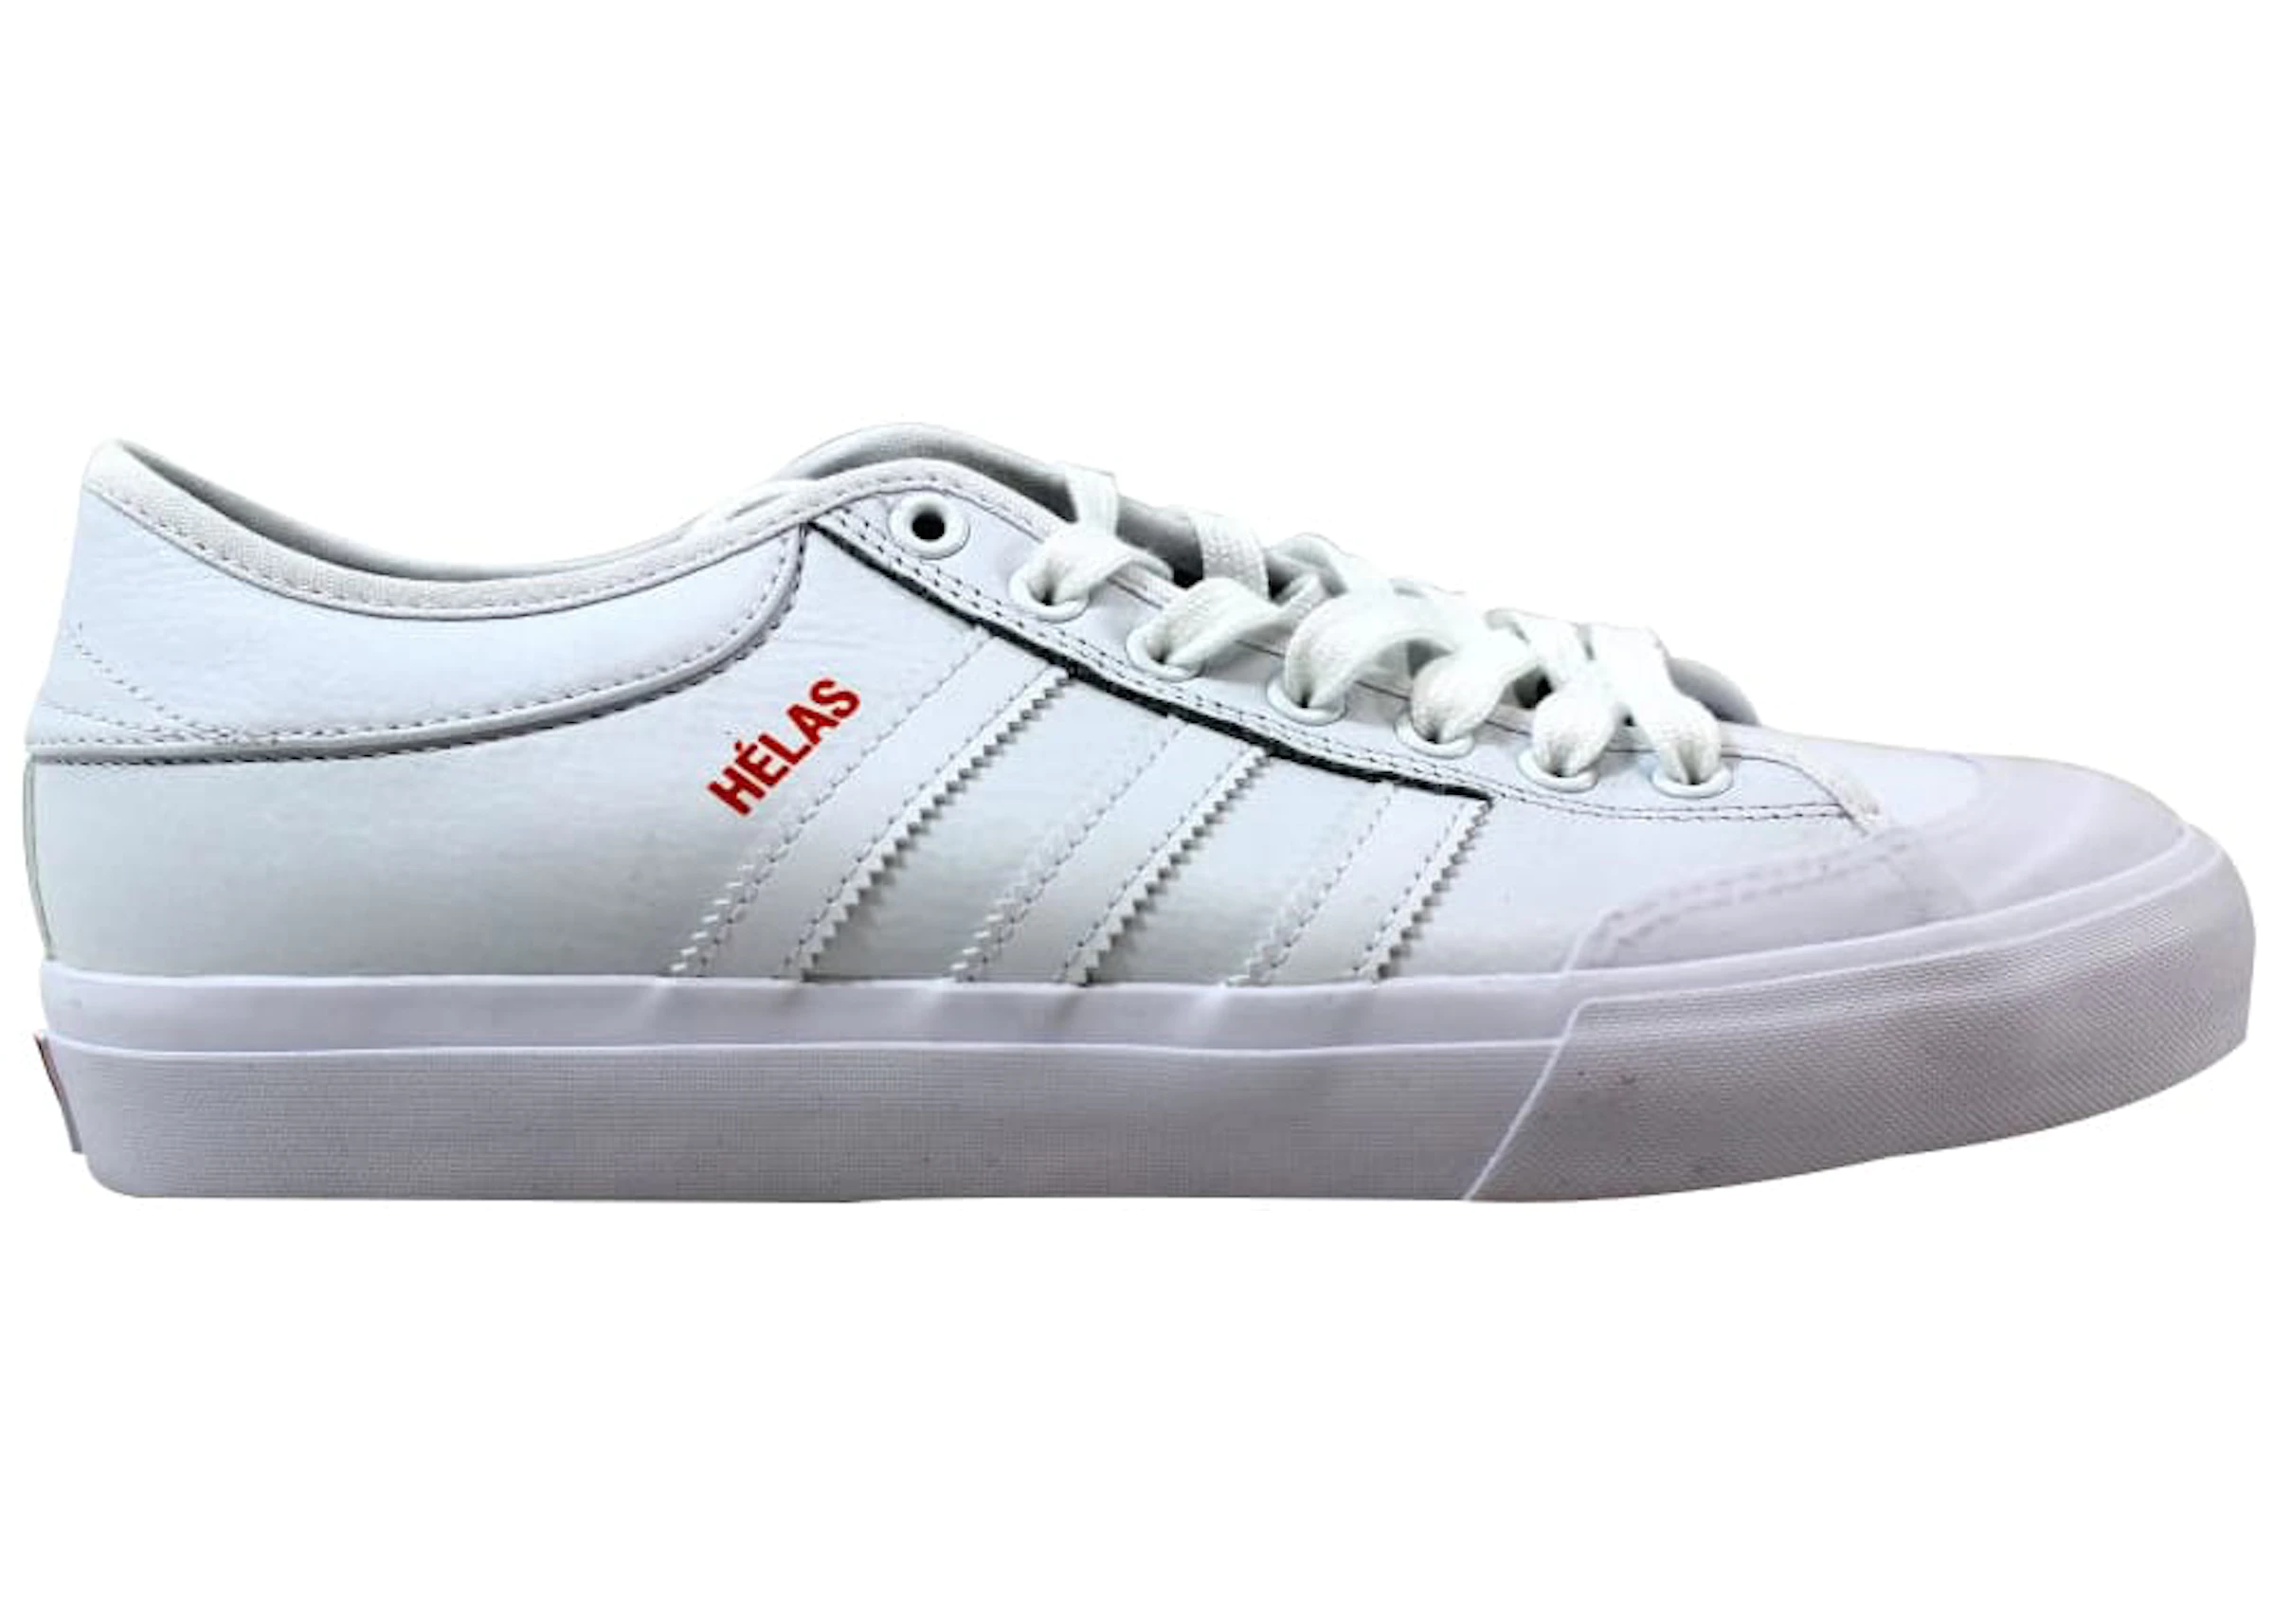 Structurally Systematically Derivation adidas Matchcourt X Helas White/White - BY4535 - US